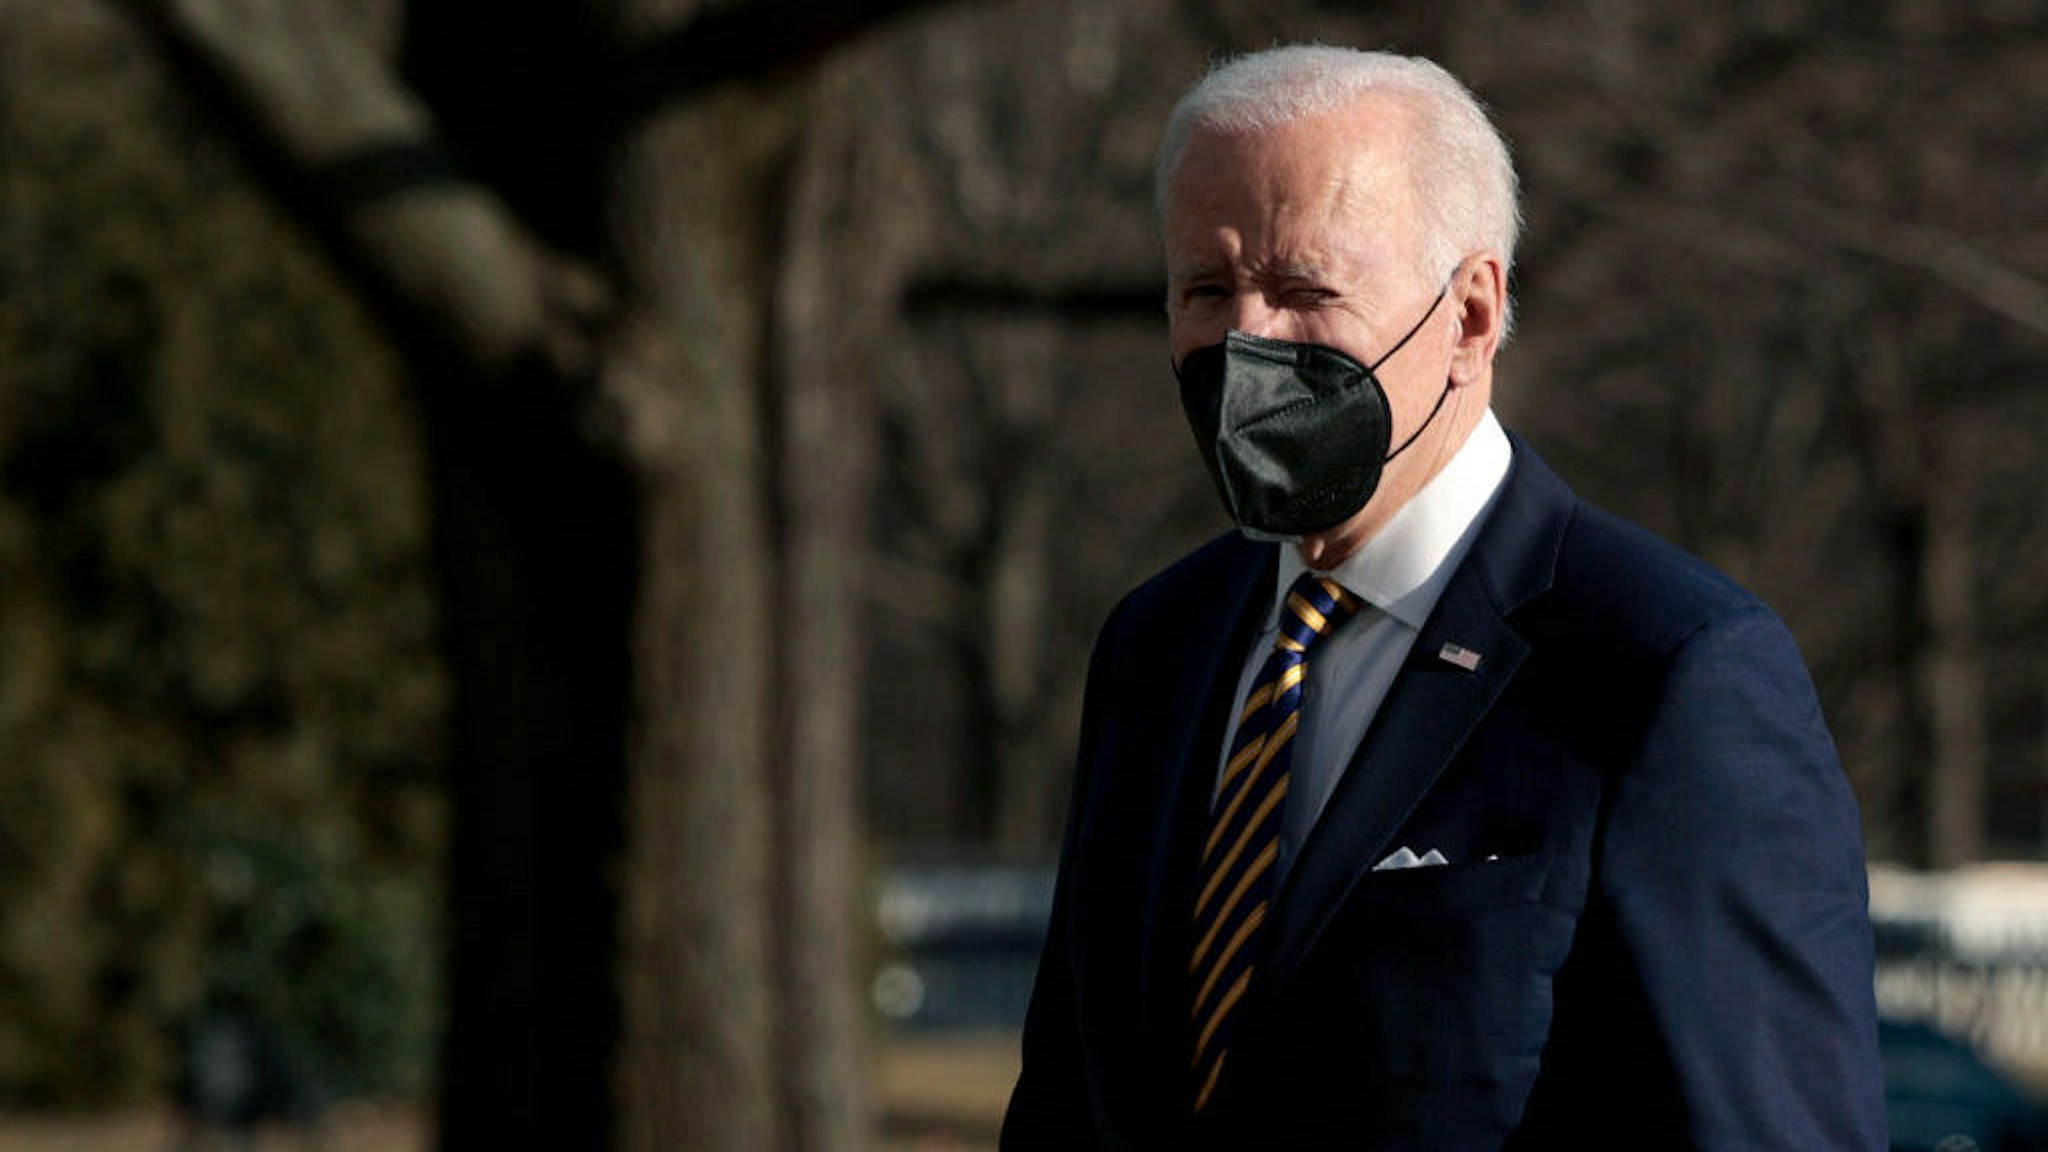 WASHINGTON, DC - FEBRUARY 10: U.S. President Joe Biden walks across the South Lawn after returning on Marine One to the White House on February 10, 2022 in Washington, DC. President Biden spent the afternoon in Culpeper, Virginia, where he delivered remarks on the work his administration has done to lower health care costs and prescription drug prices. (Photo by Anna Moneymaker/Getty Images)